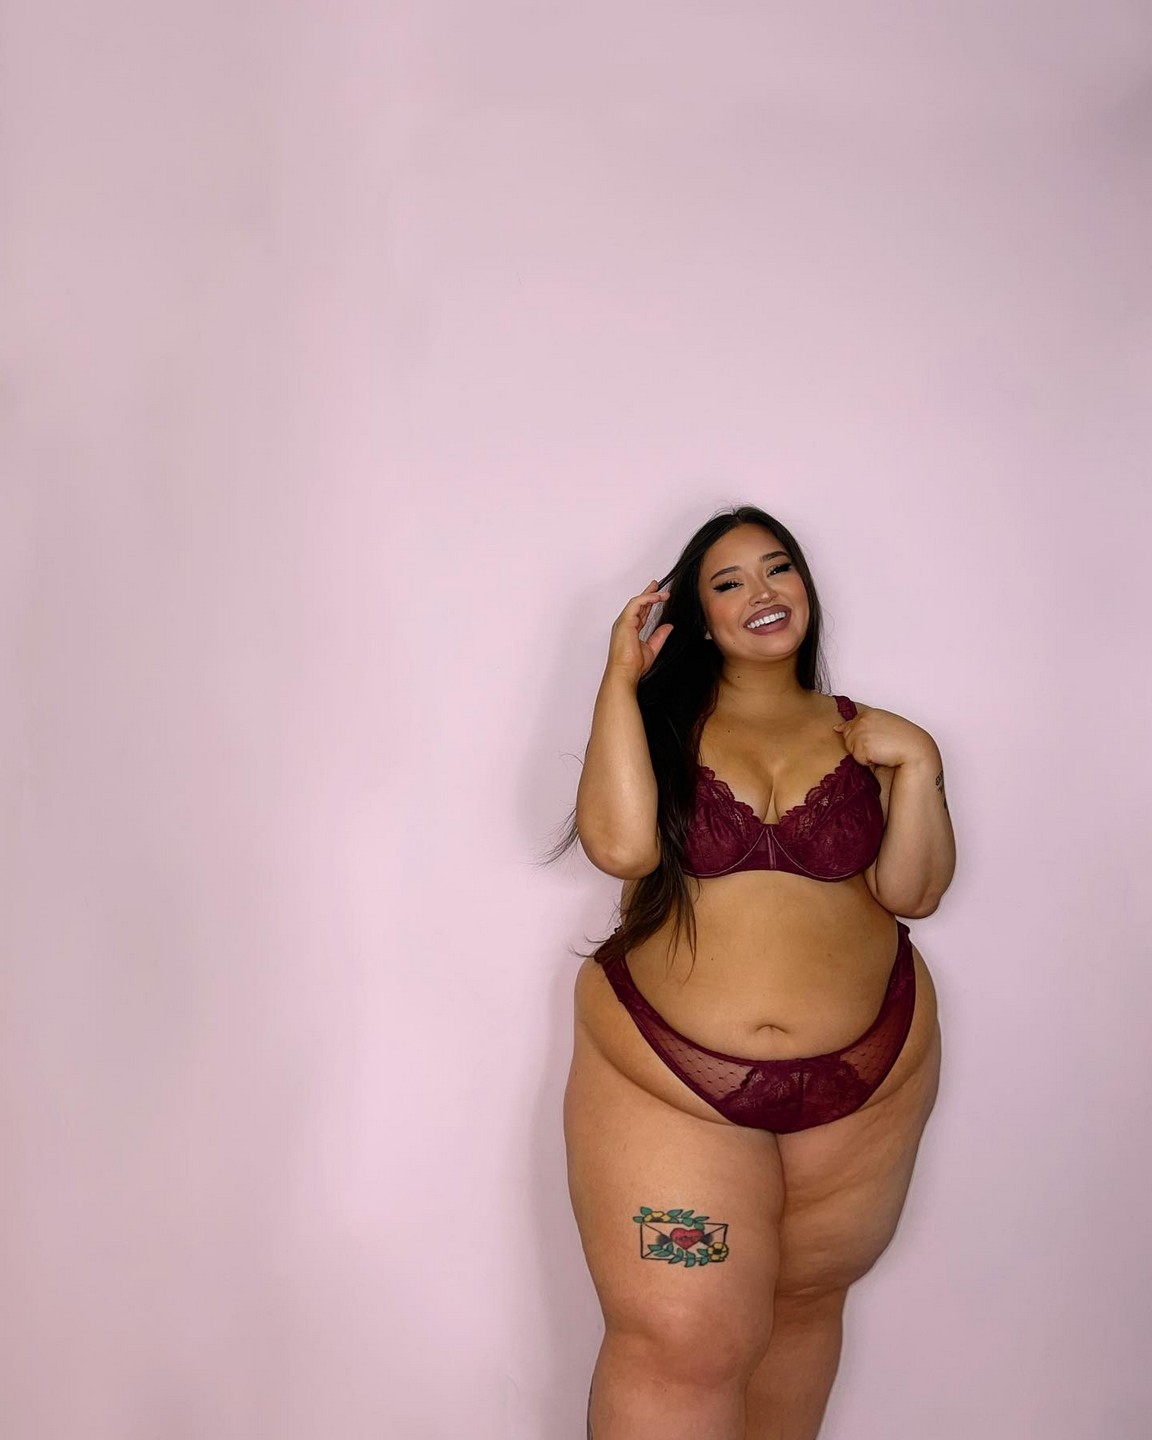 Erika Lipps Sexy In Lingerie TheFappening.Pro 22 - Erika Lipps Real Jabba Girl (29 Photos)